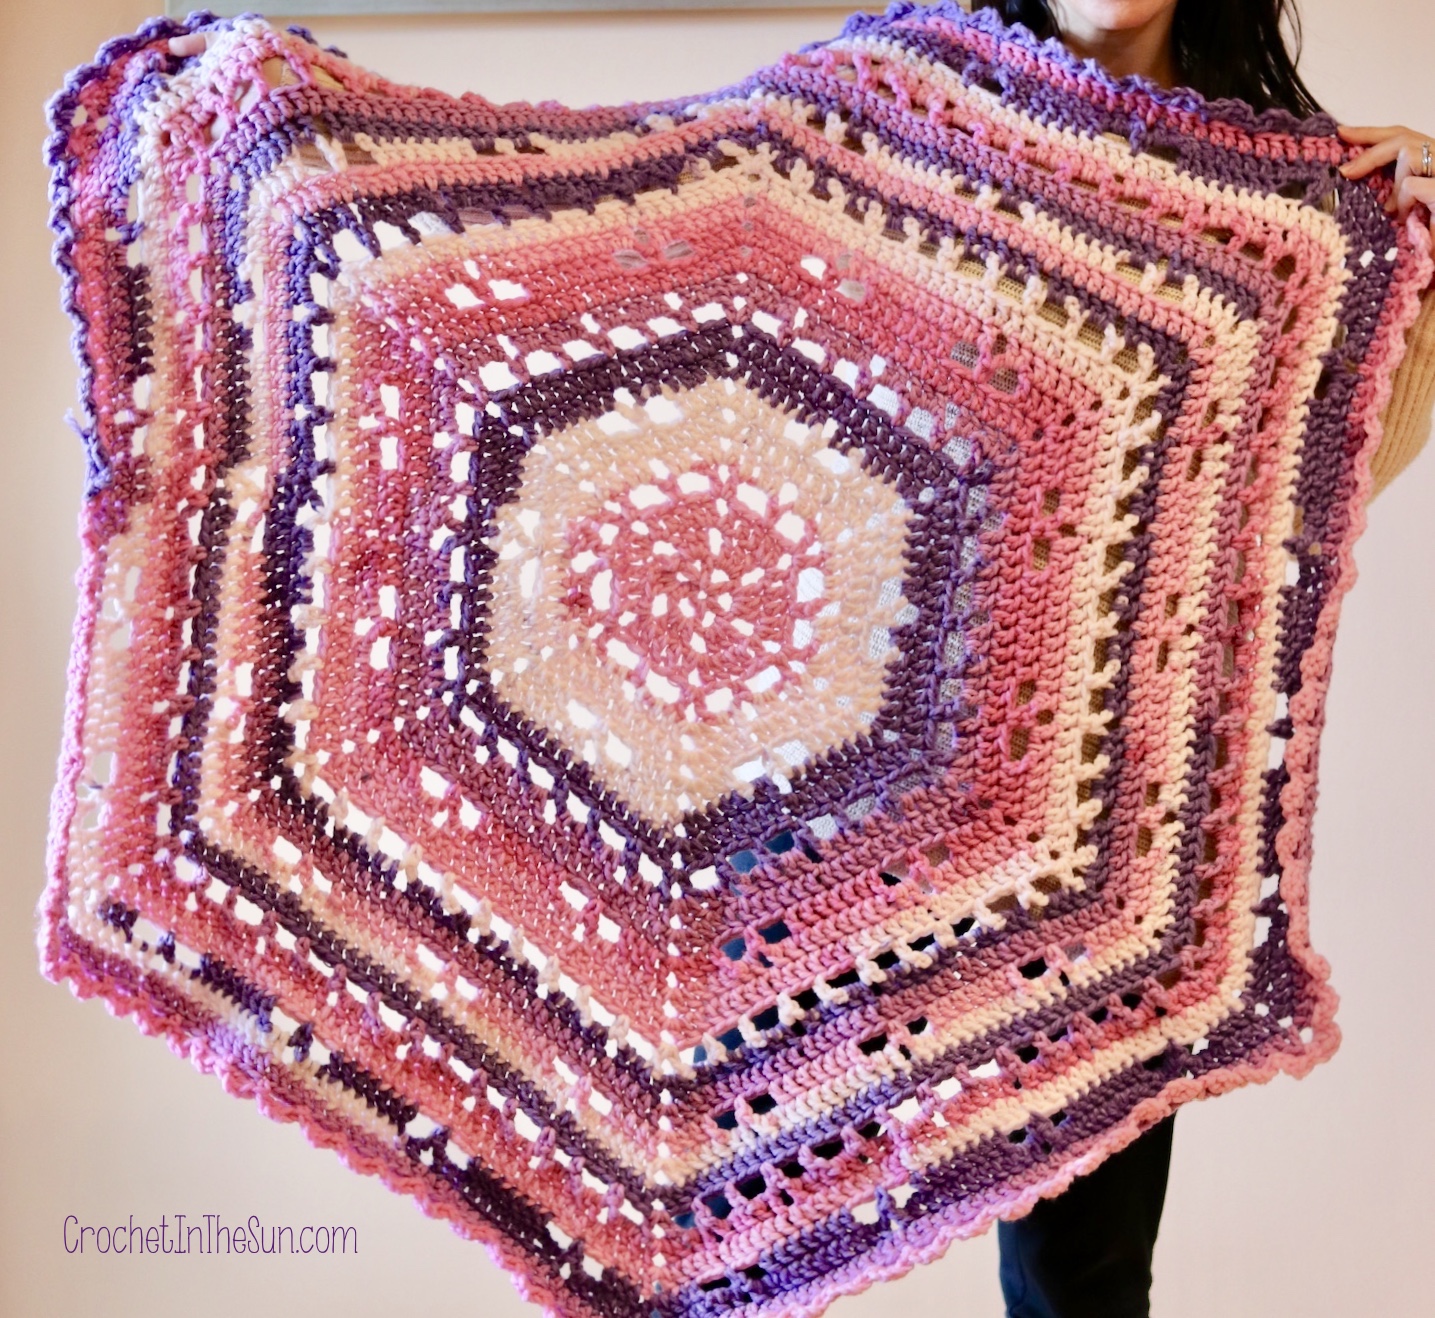 How to crochet blankets. Here is 1 beautiful blanket that works up quickly with Caron Chunky Cakes #crochet